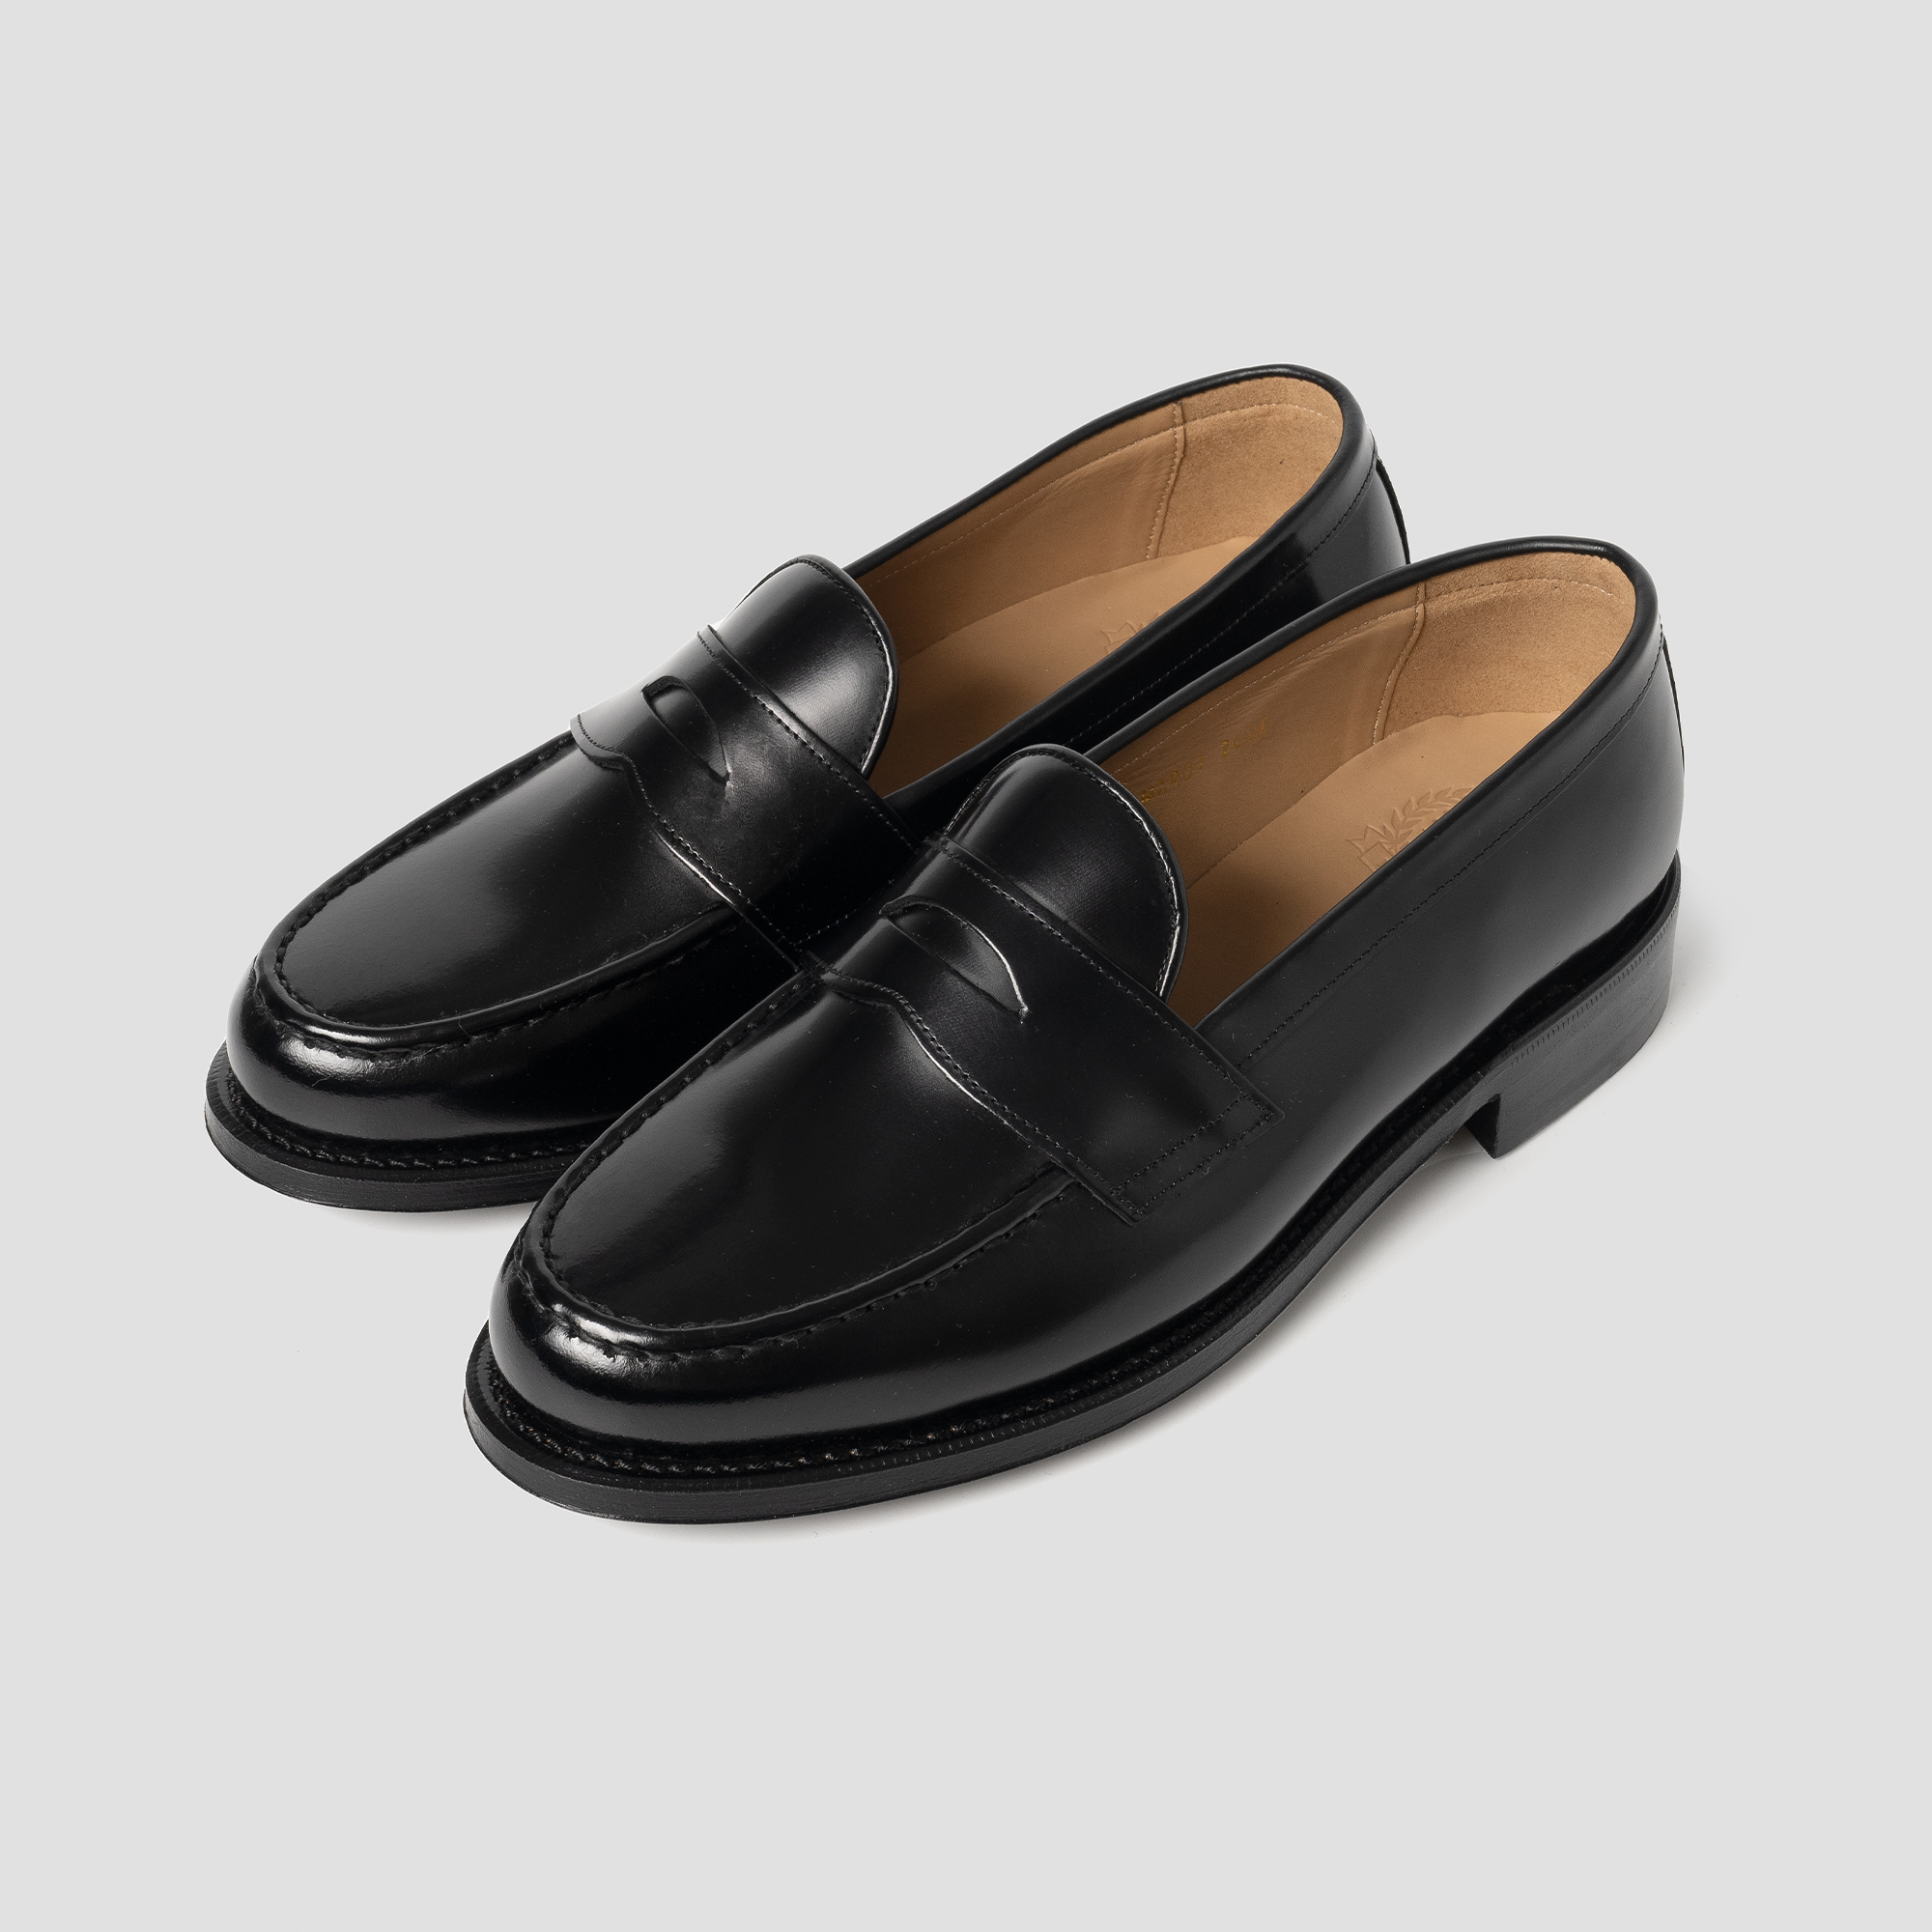 MELAVORO Goodyear Welted Penny Loafer [Black]리넥츠